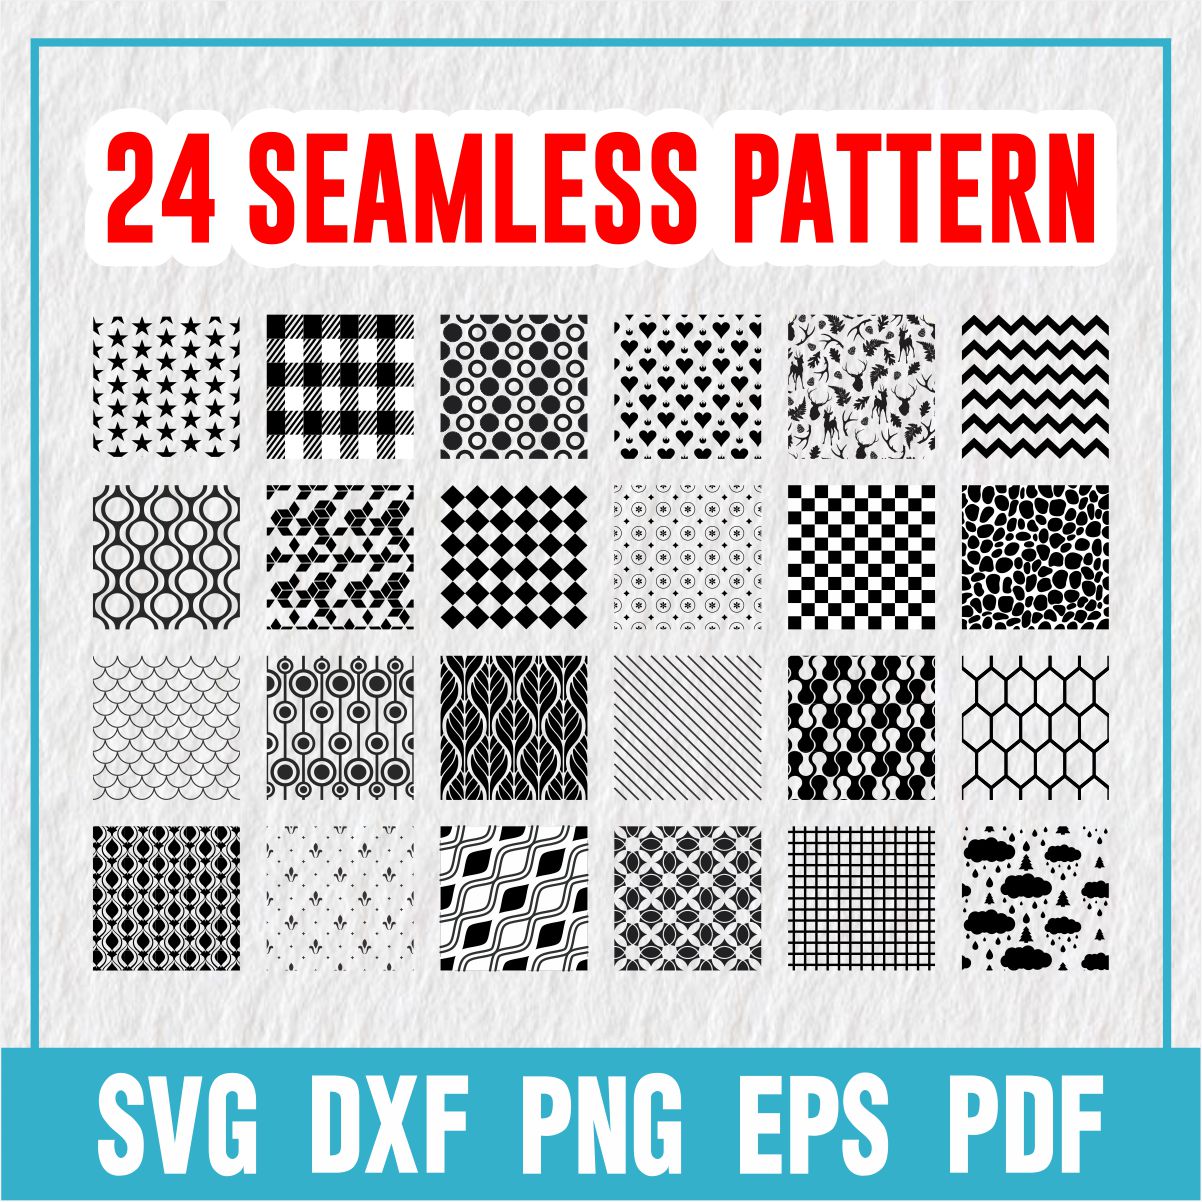 24 Patterns, Heart Pattern, Seamless Pattern, Christmas Pattern, SVG Cut Files for Cricut and Silhouette main cover.